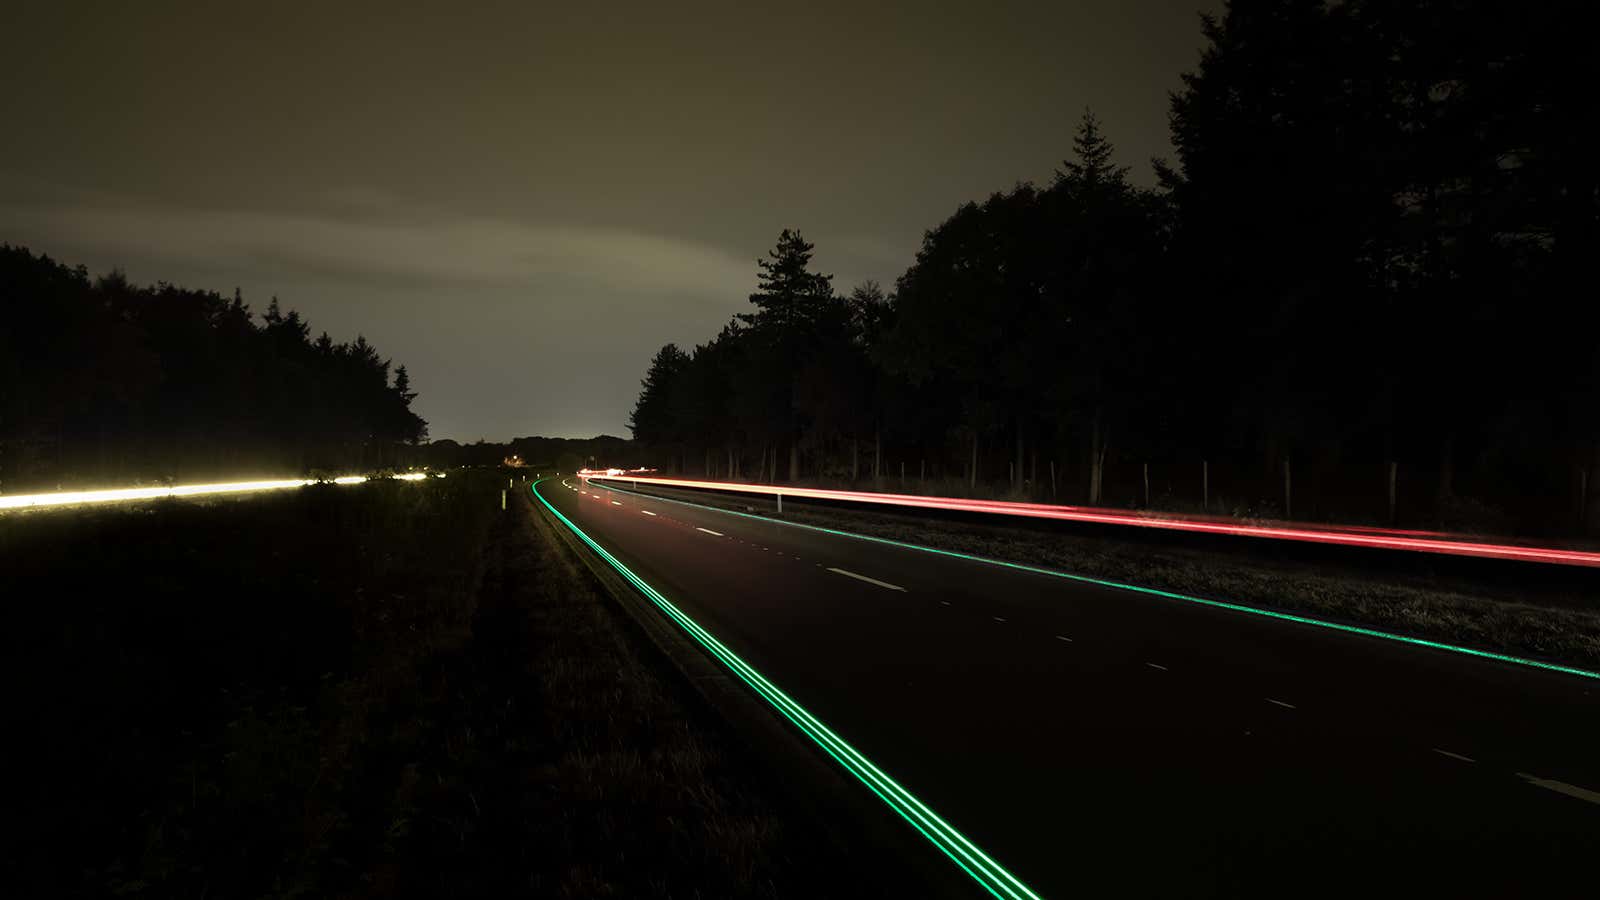 Will glowing traffic lines be a standard feature of future highways?